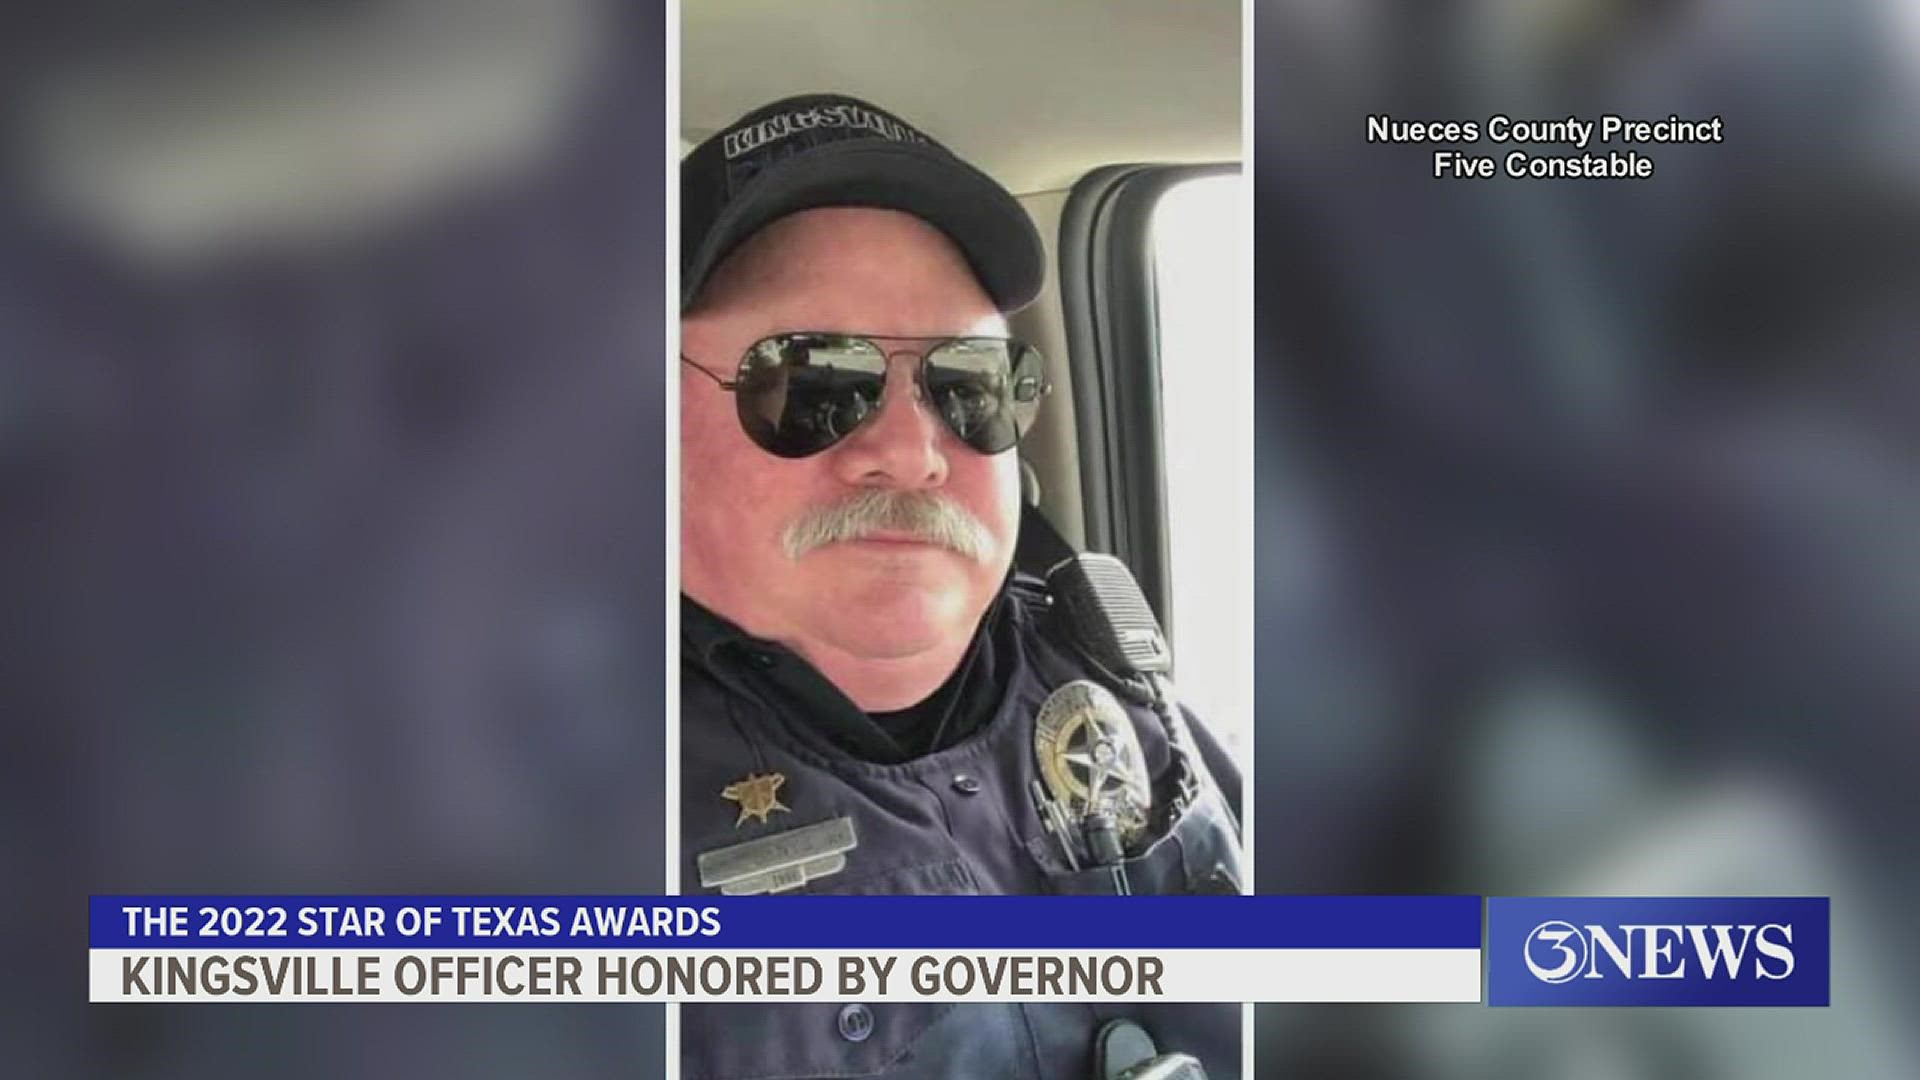 According to Kingsville Police Chief Ricardo Torres, he nominated Benys for the award because of his service and sacrifice for the community.